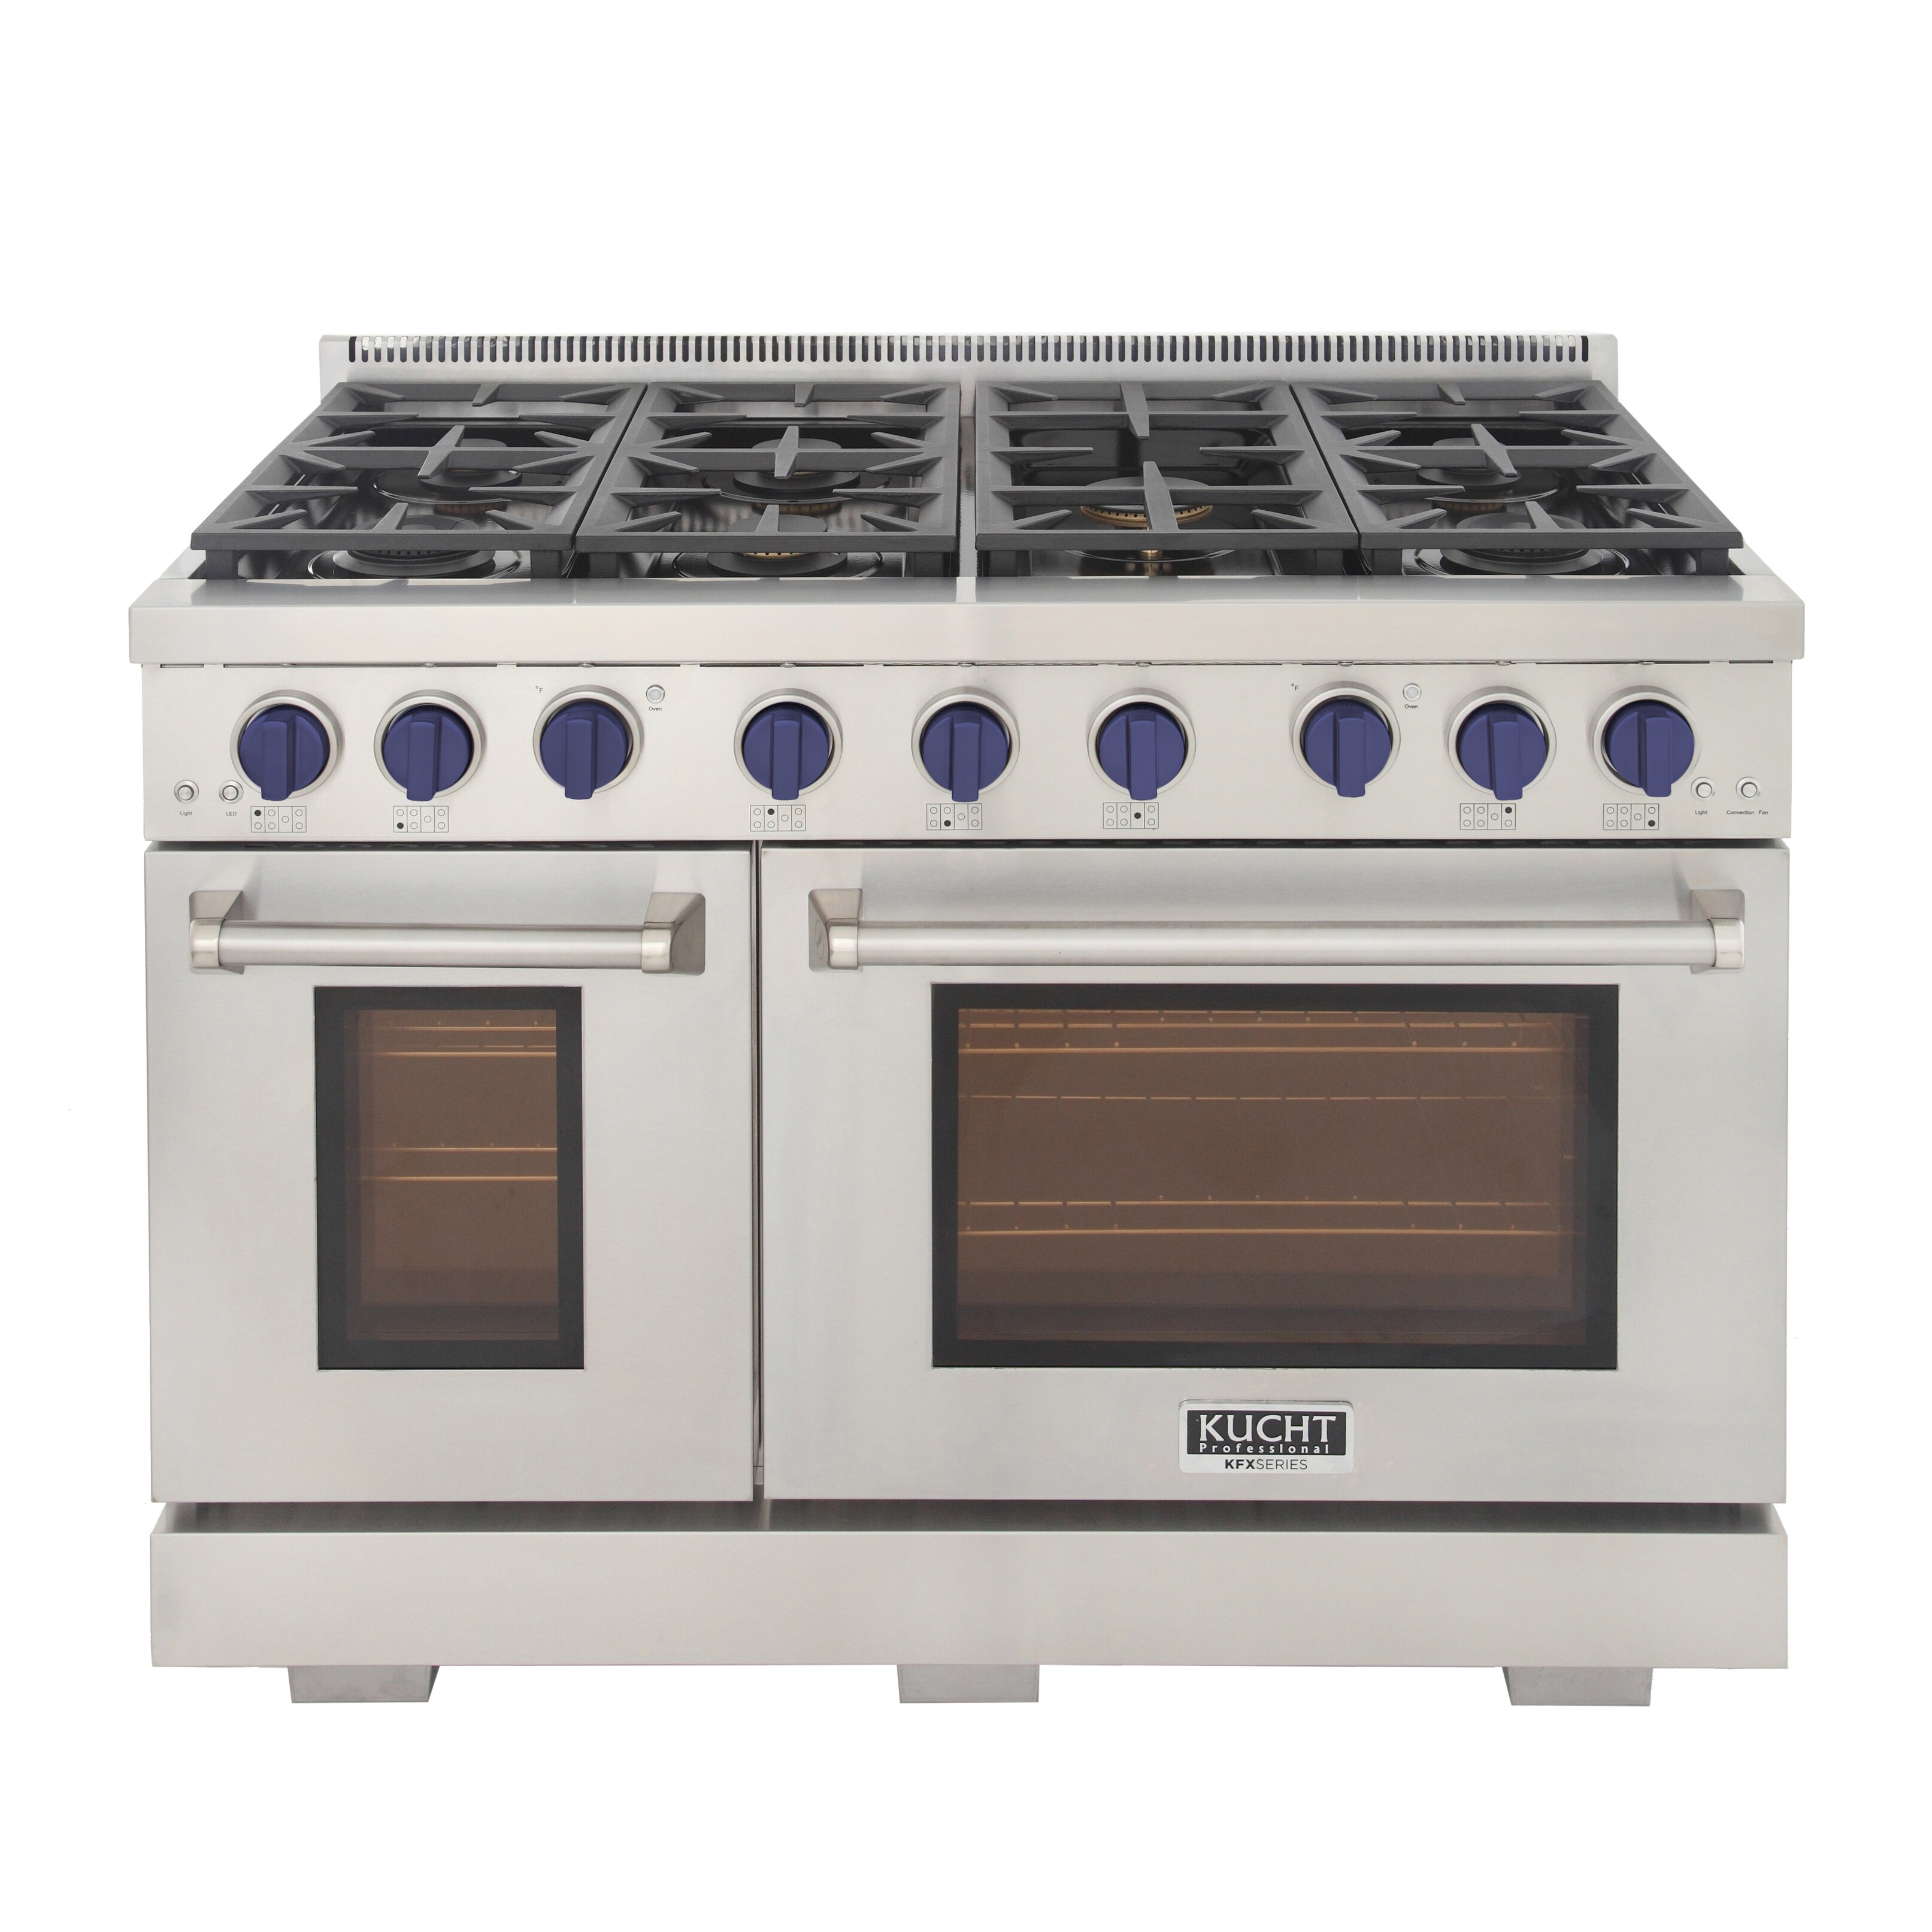 KUCHT Professional 48 in. 6.7 cu. ft. Double Oven Propane Gas Range with 25K Power Burner, Convection Oven in Stainless Steel